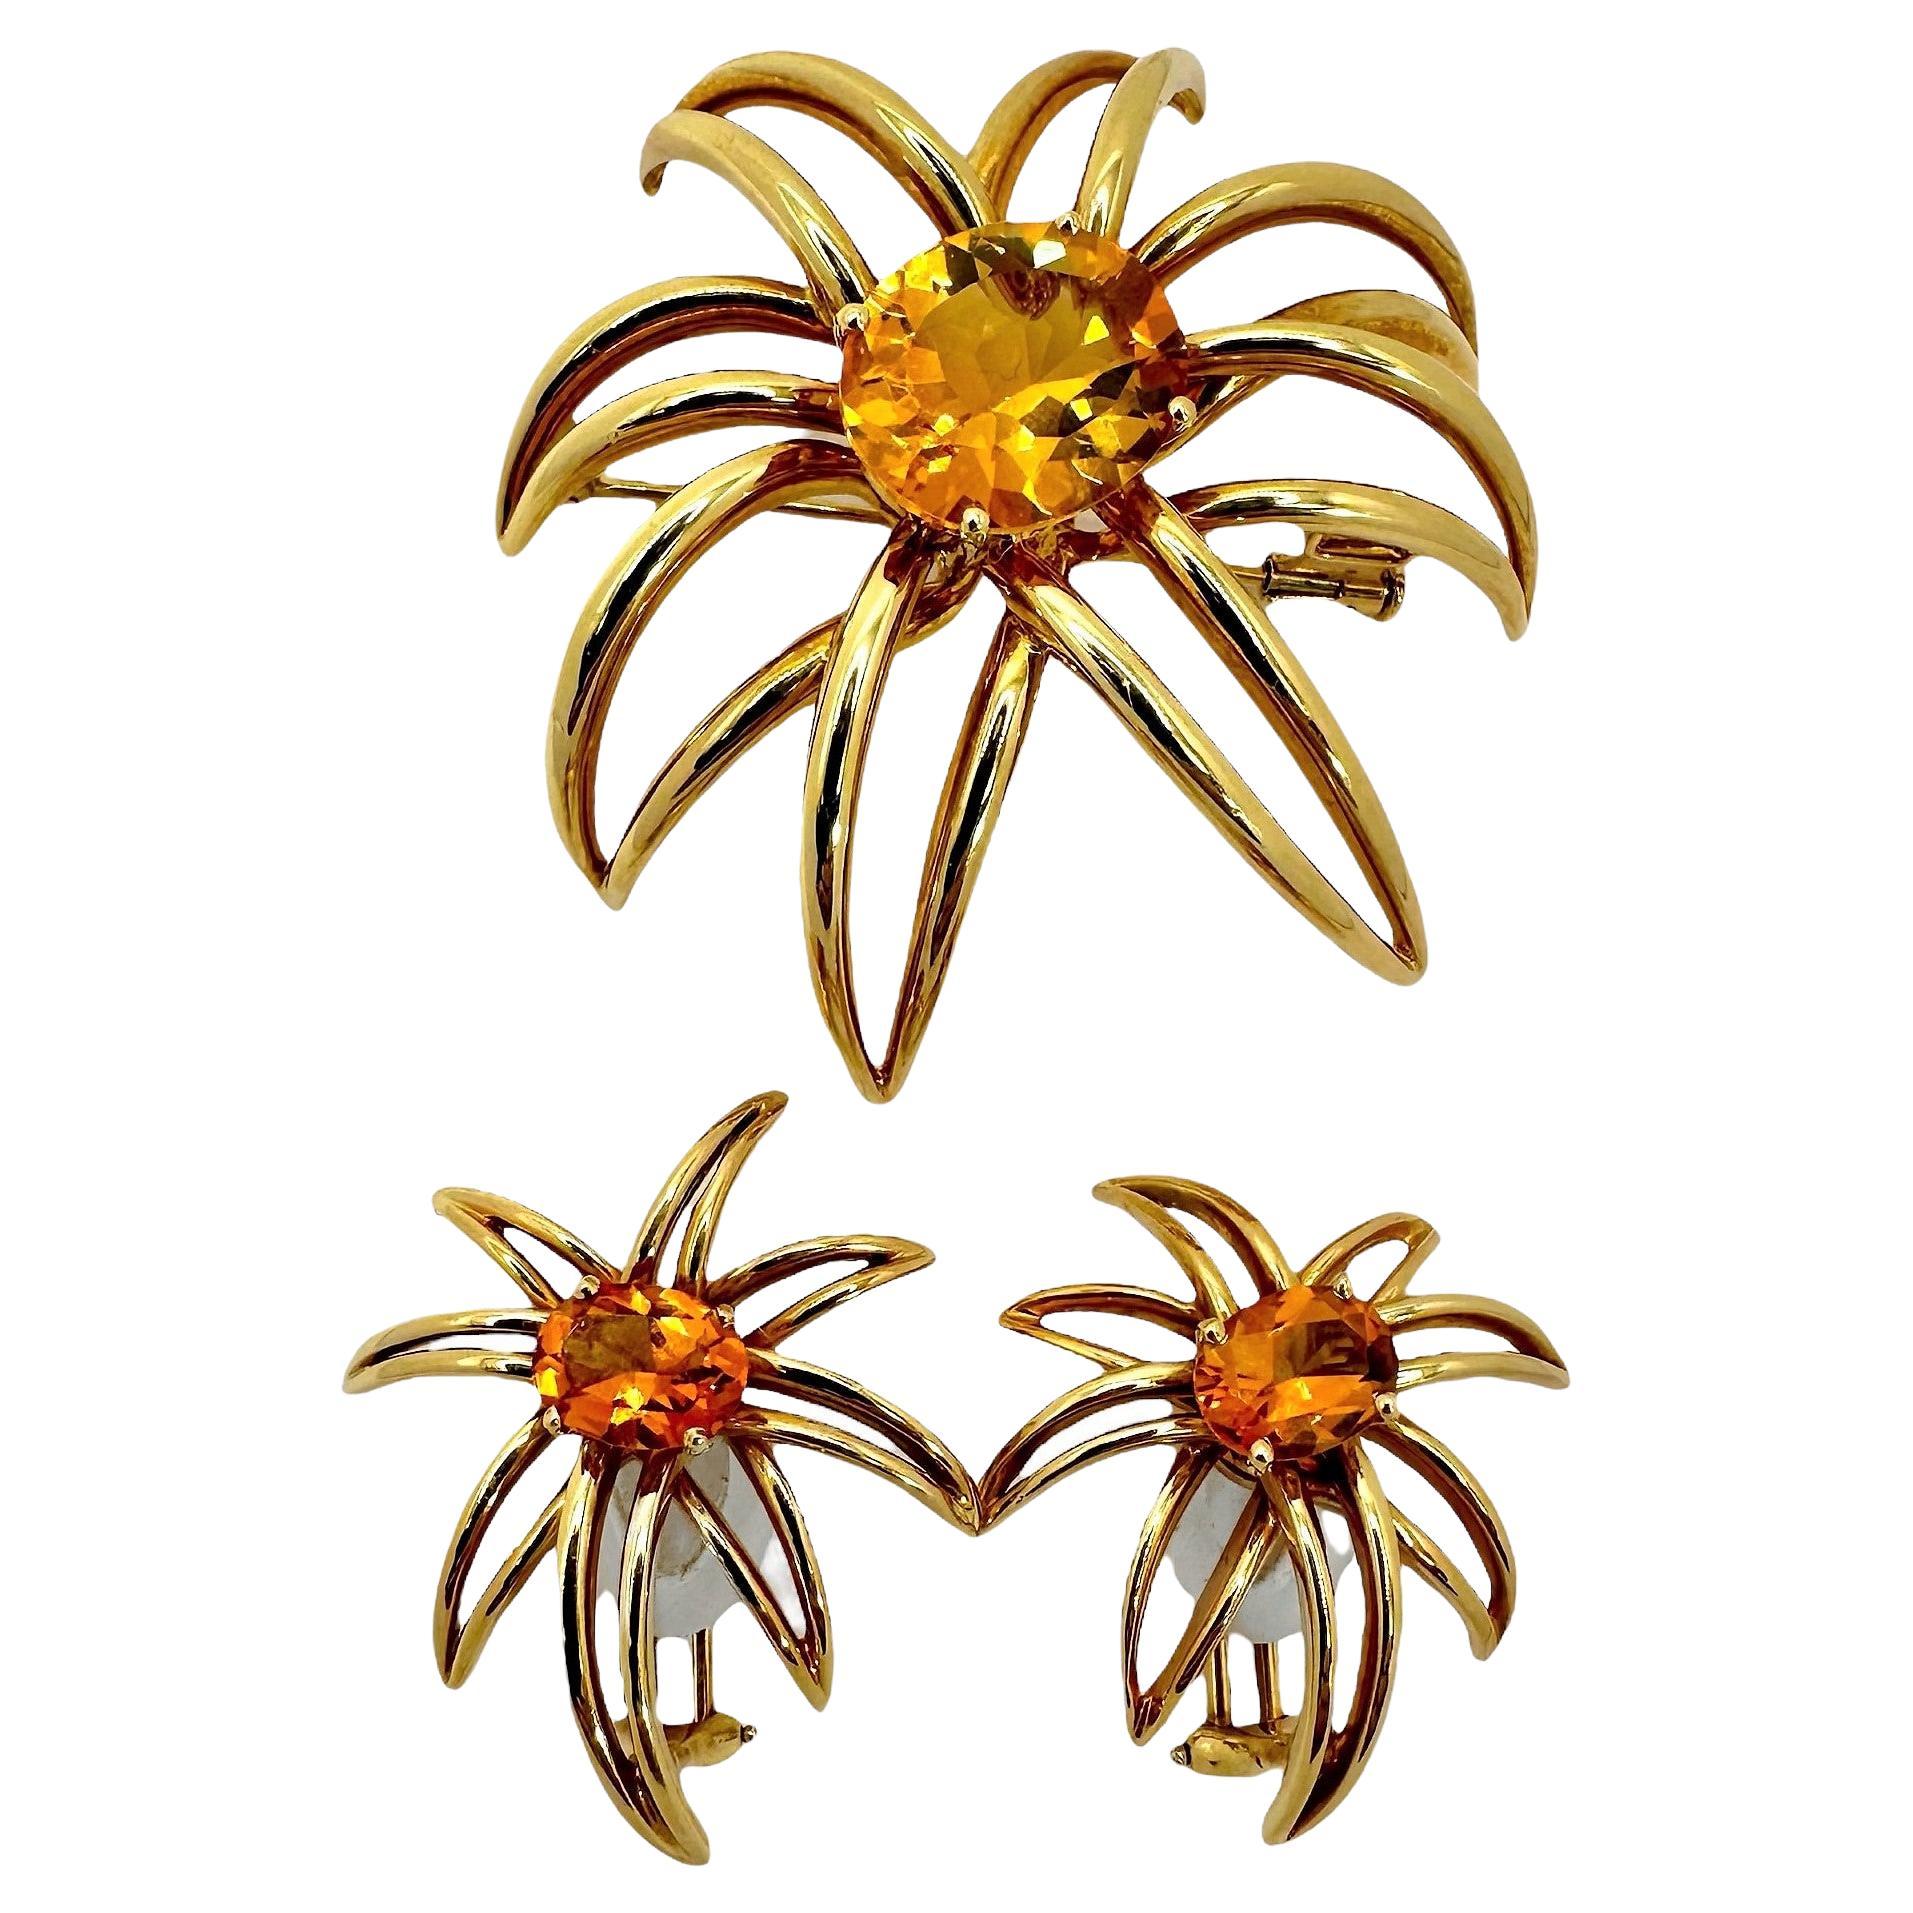 Tiffany & Company 18k Gold and Citrine " Fireworks" Brooch and Earrings Set For Sale